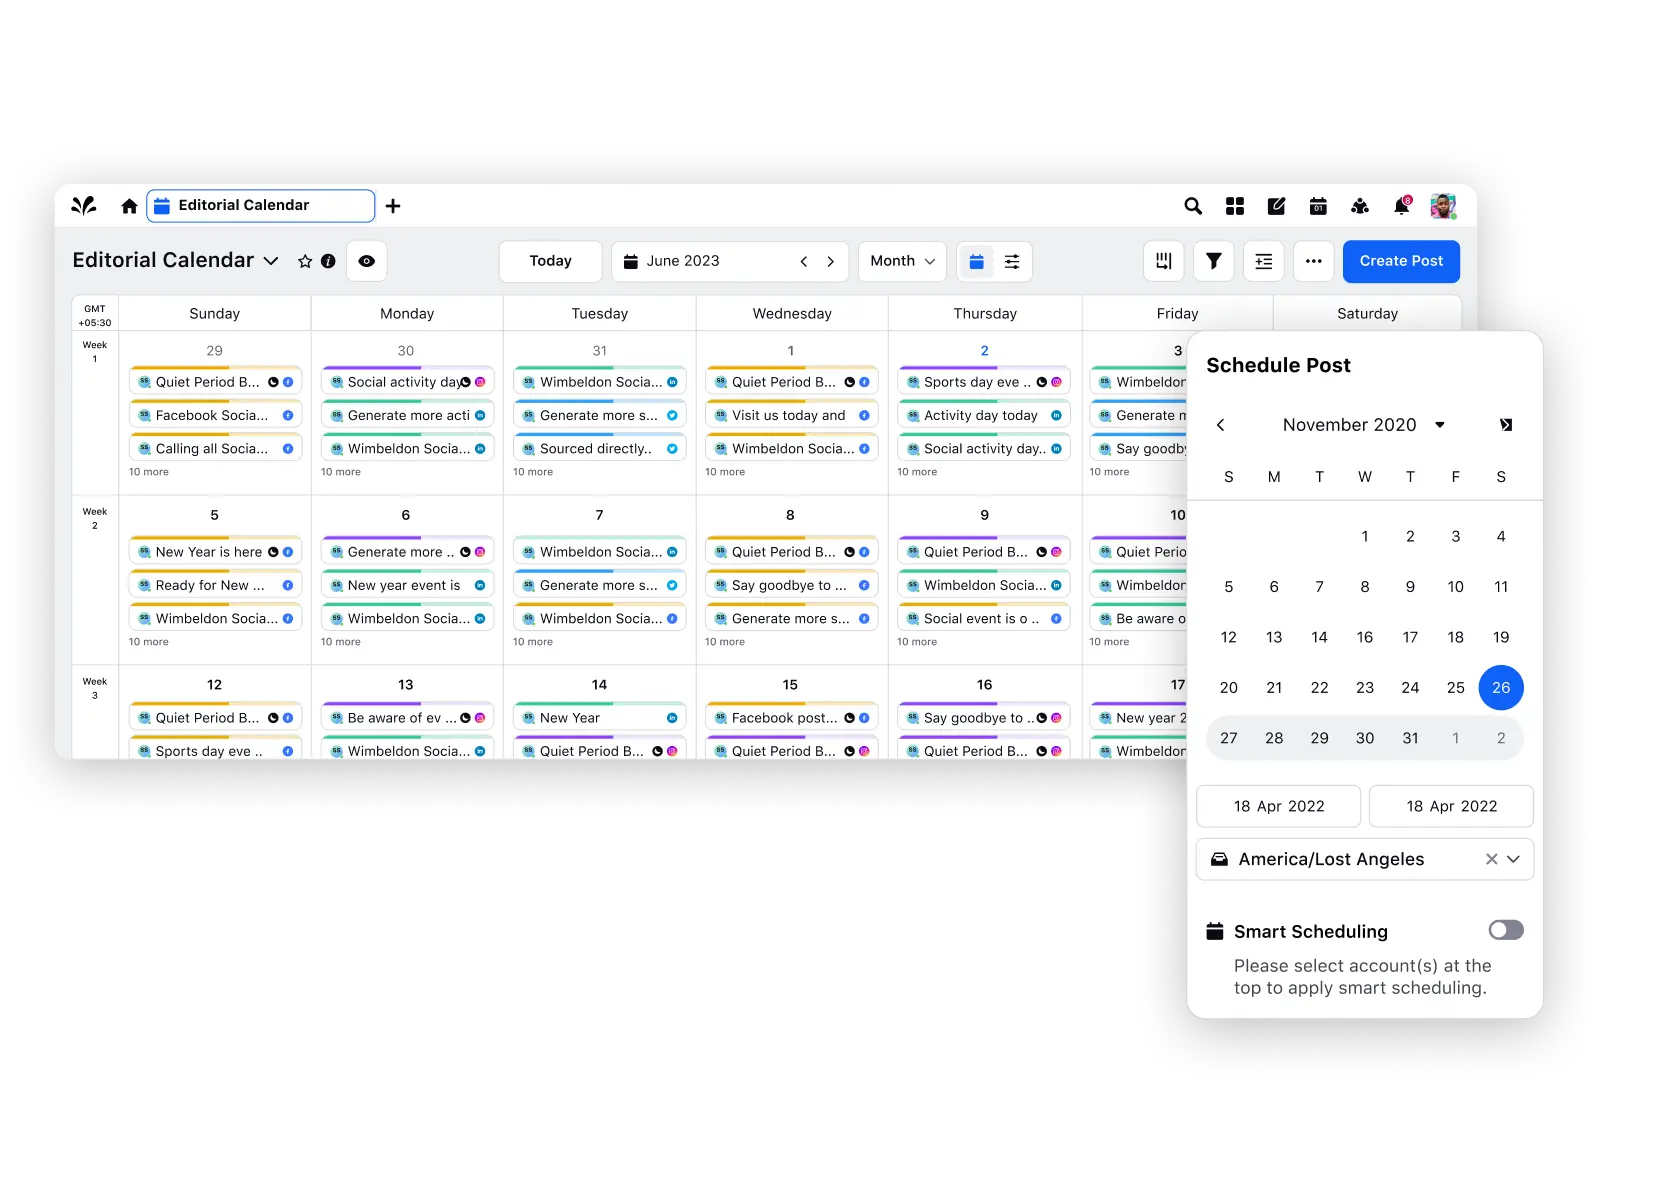 With all your publishing happening from a single marketing calendar, track pockets of inactivity in your content schedule and plug those gaps proactively.  